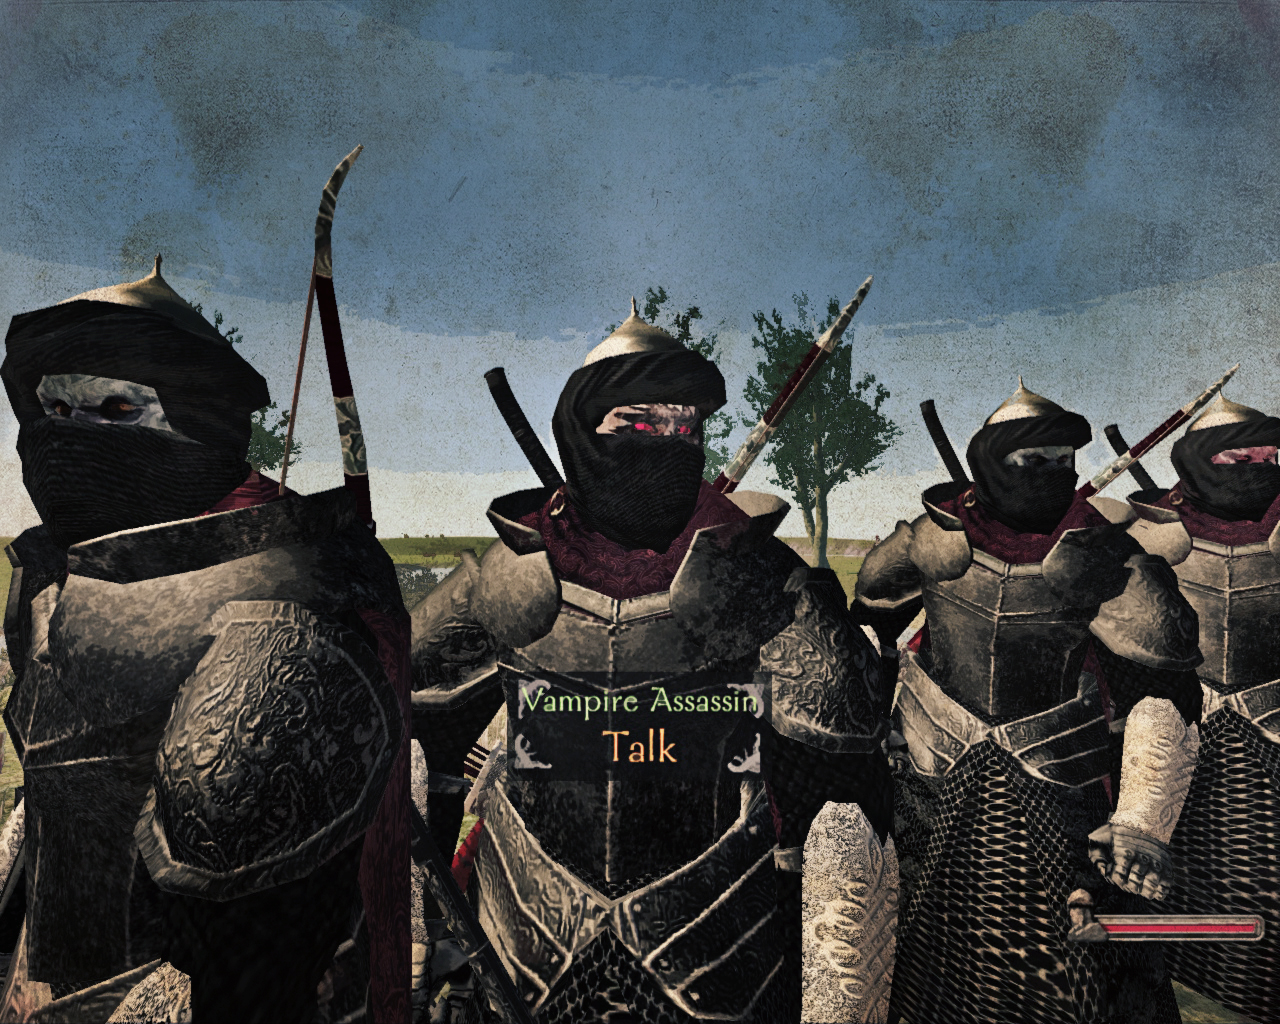 north and south mount and blade warband mod